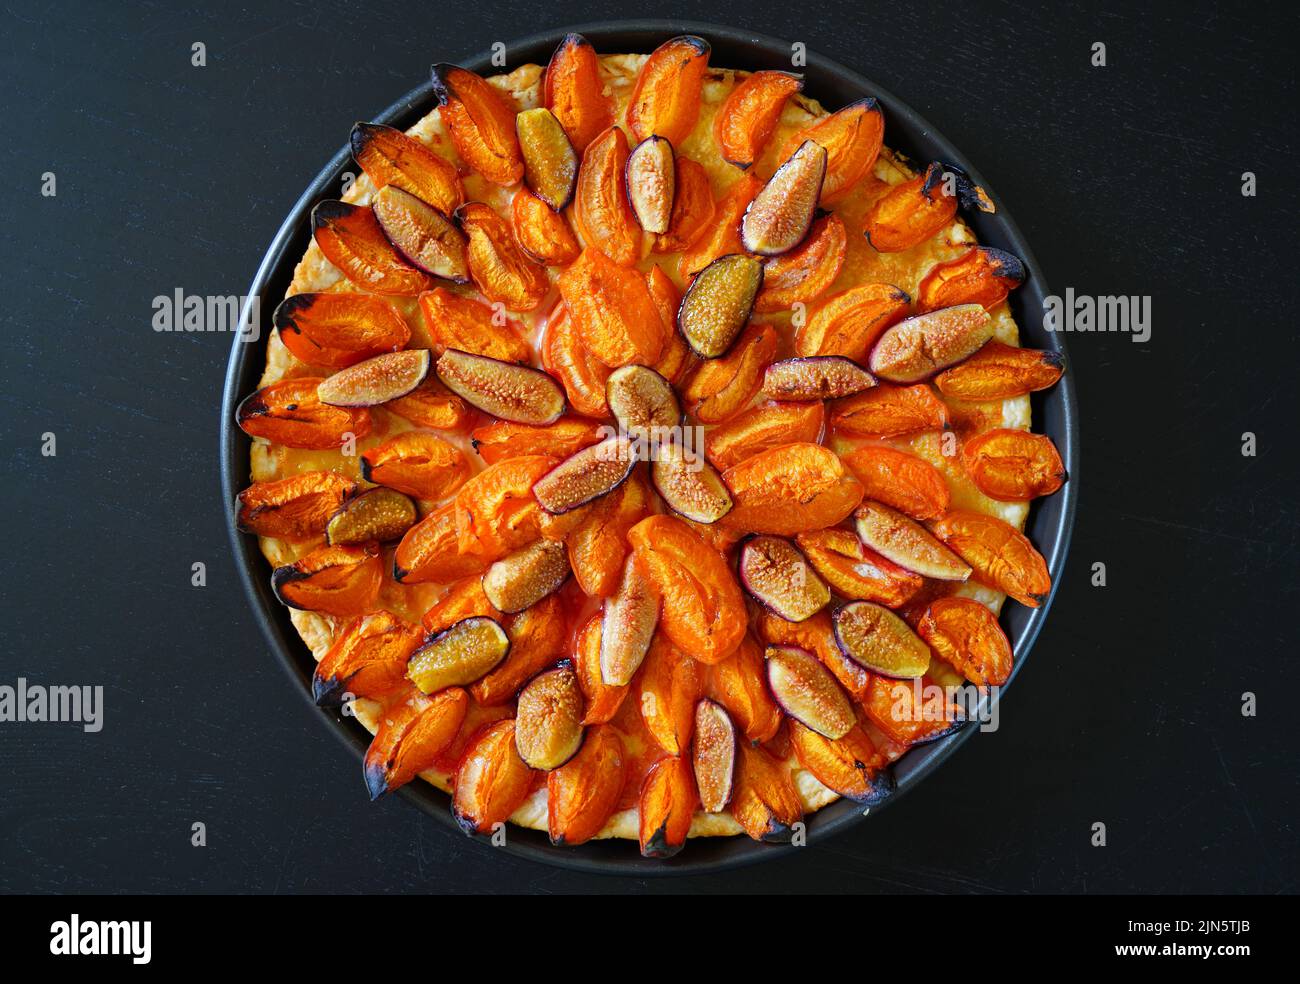 Homemade tart with apricots, figs and almonds Stock Photo